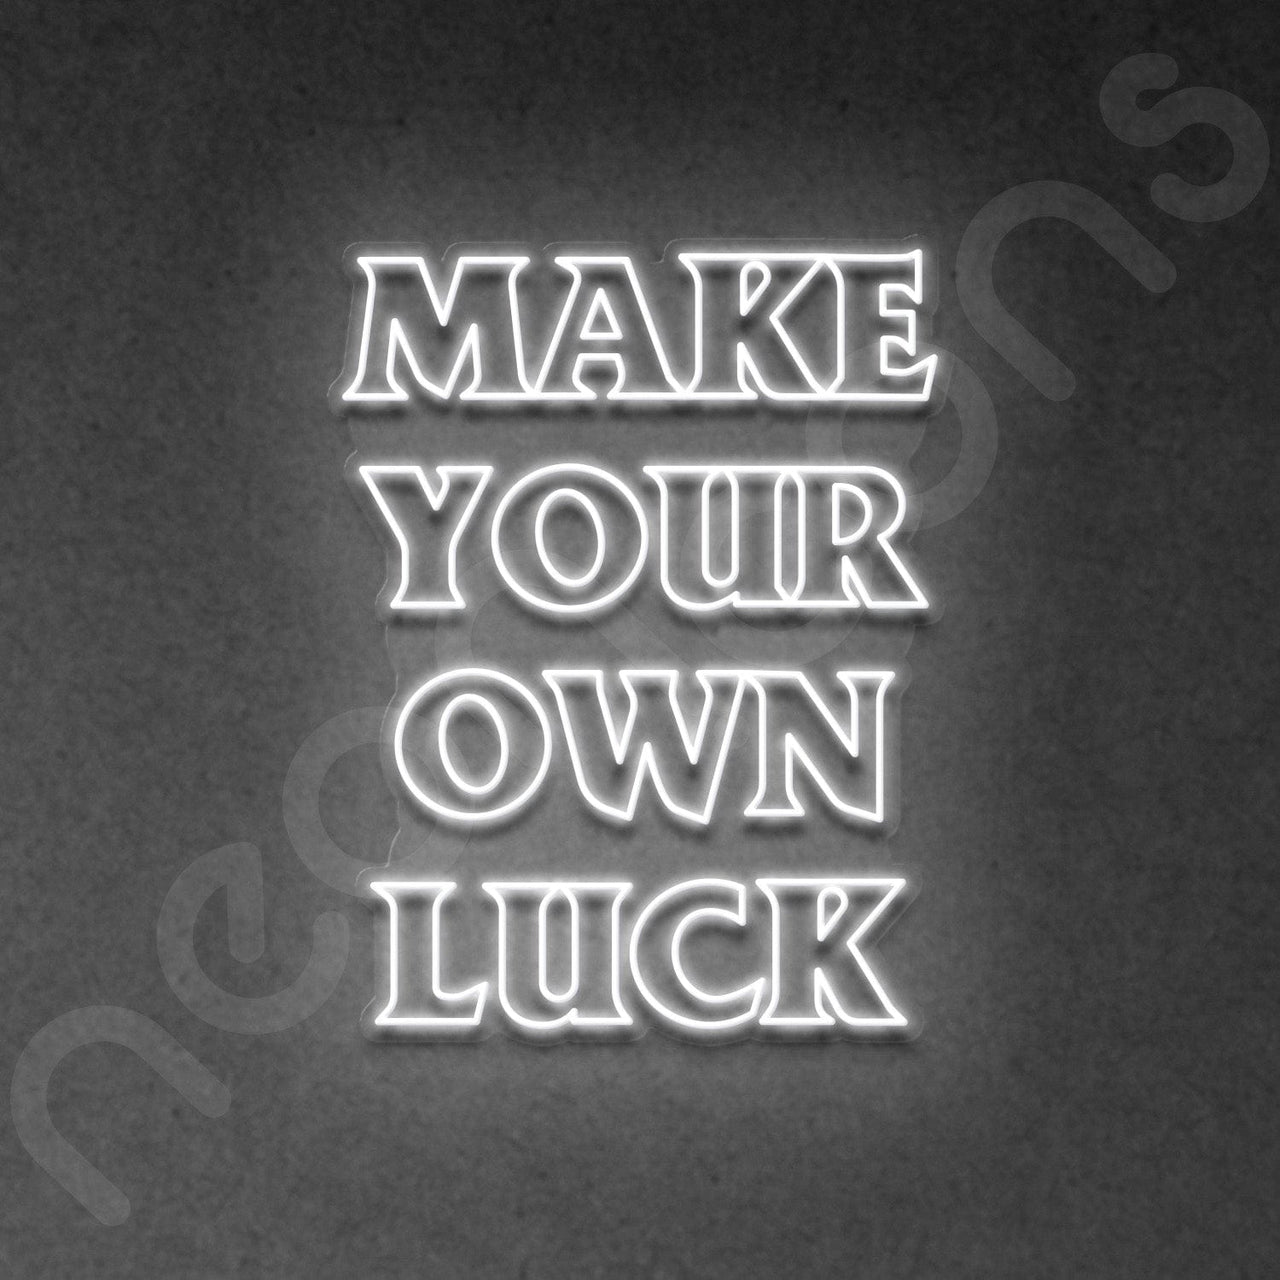 MAKE YOUR OWN LUCK by Tattooed and Successful by Tattooed and Successful